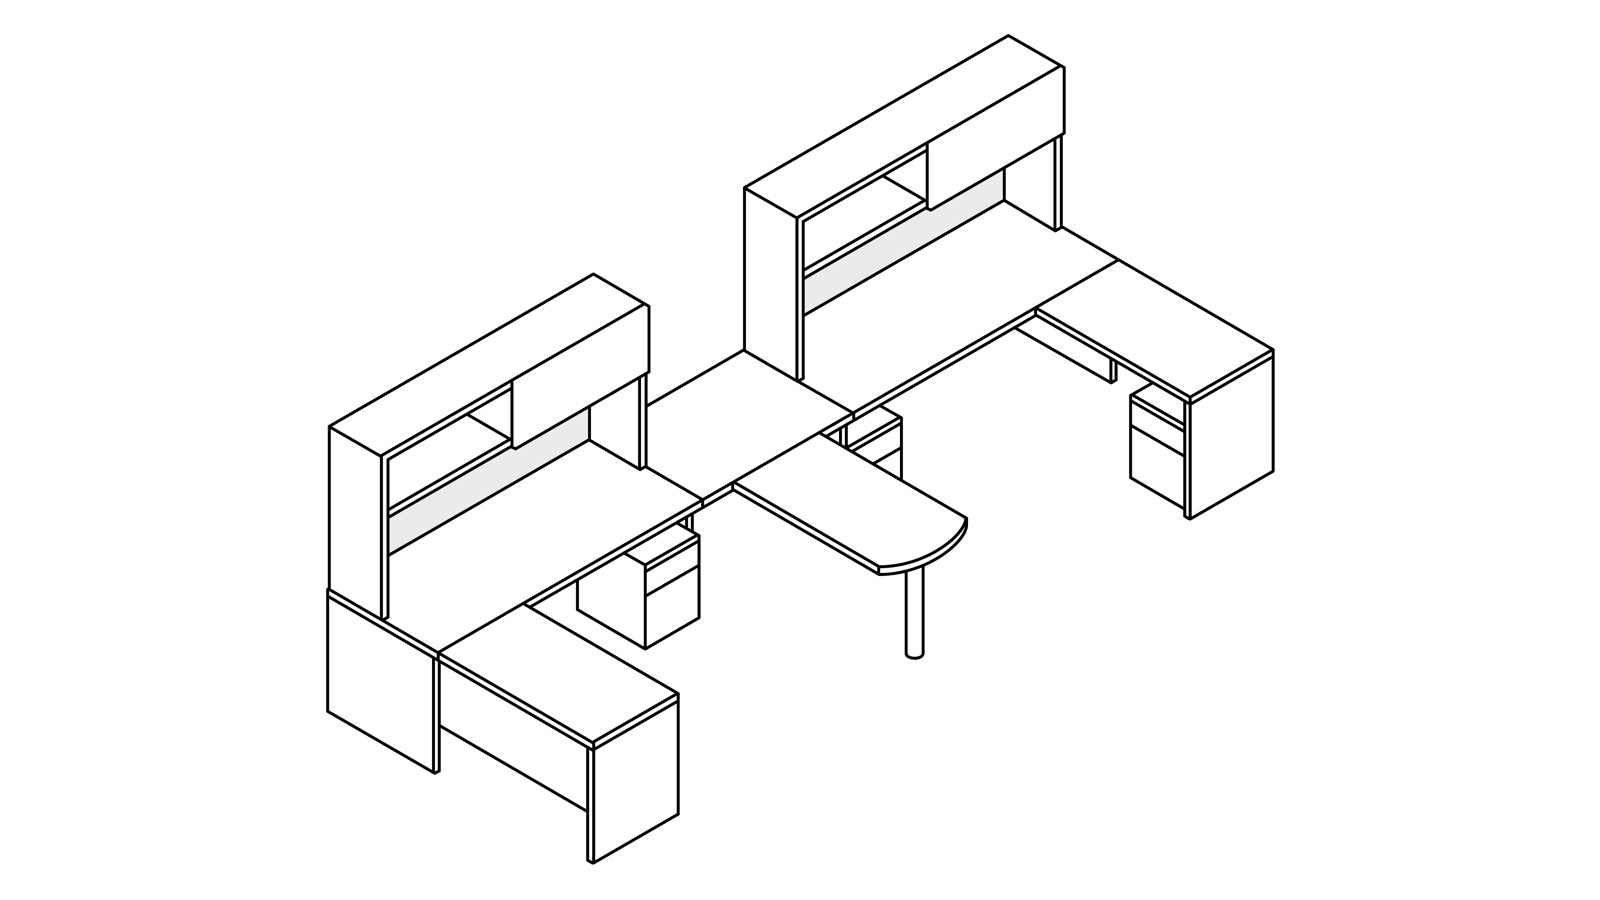 A line drawing of two Canvas Metal Desks with upper storage and a shared peninsula surface.